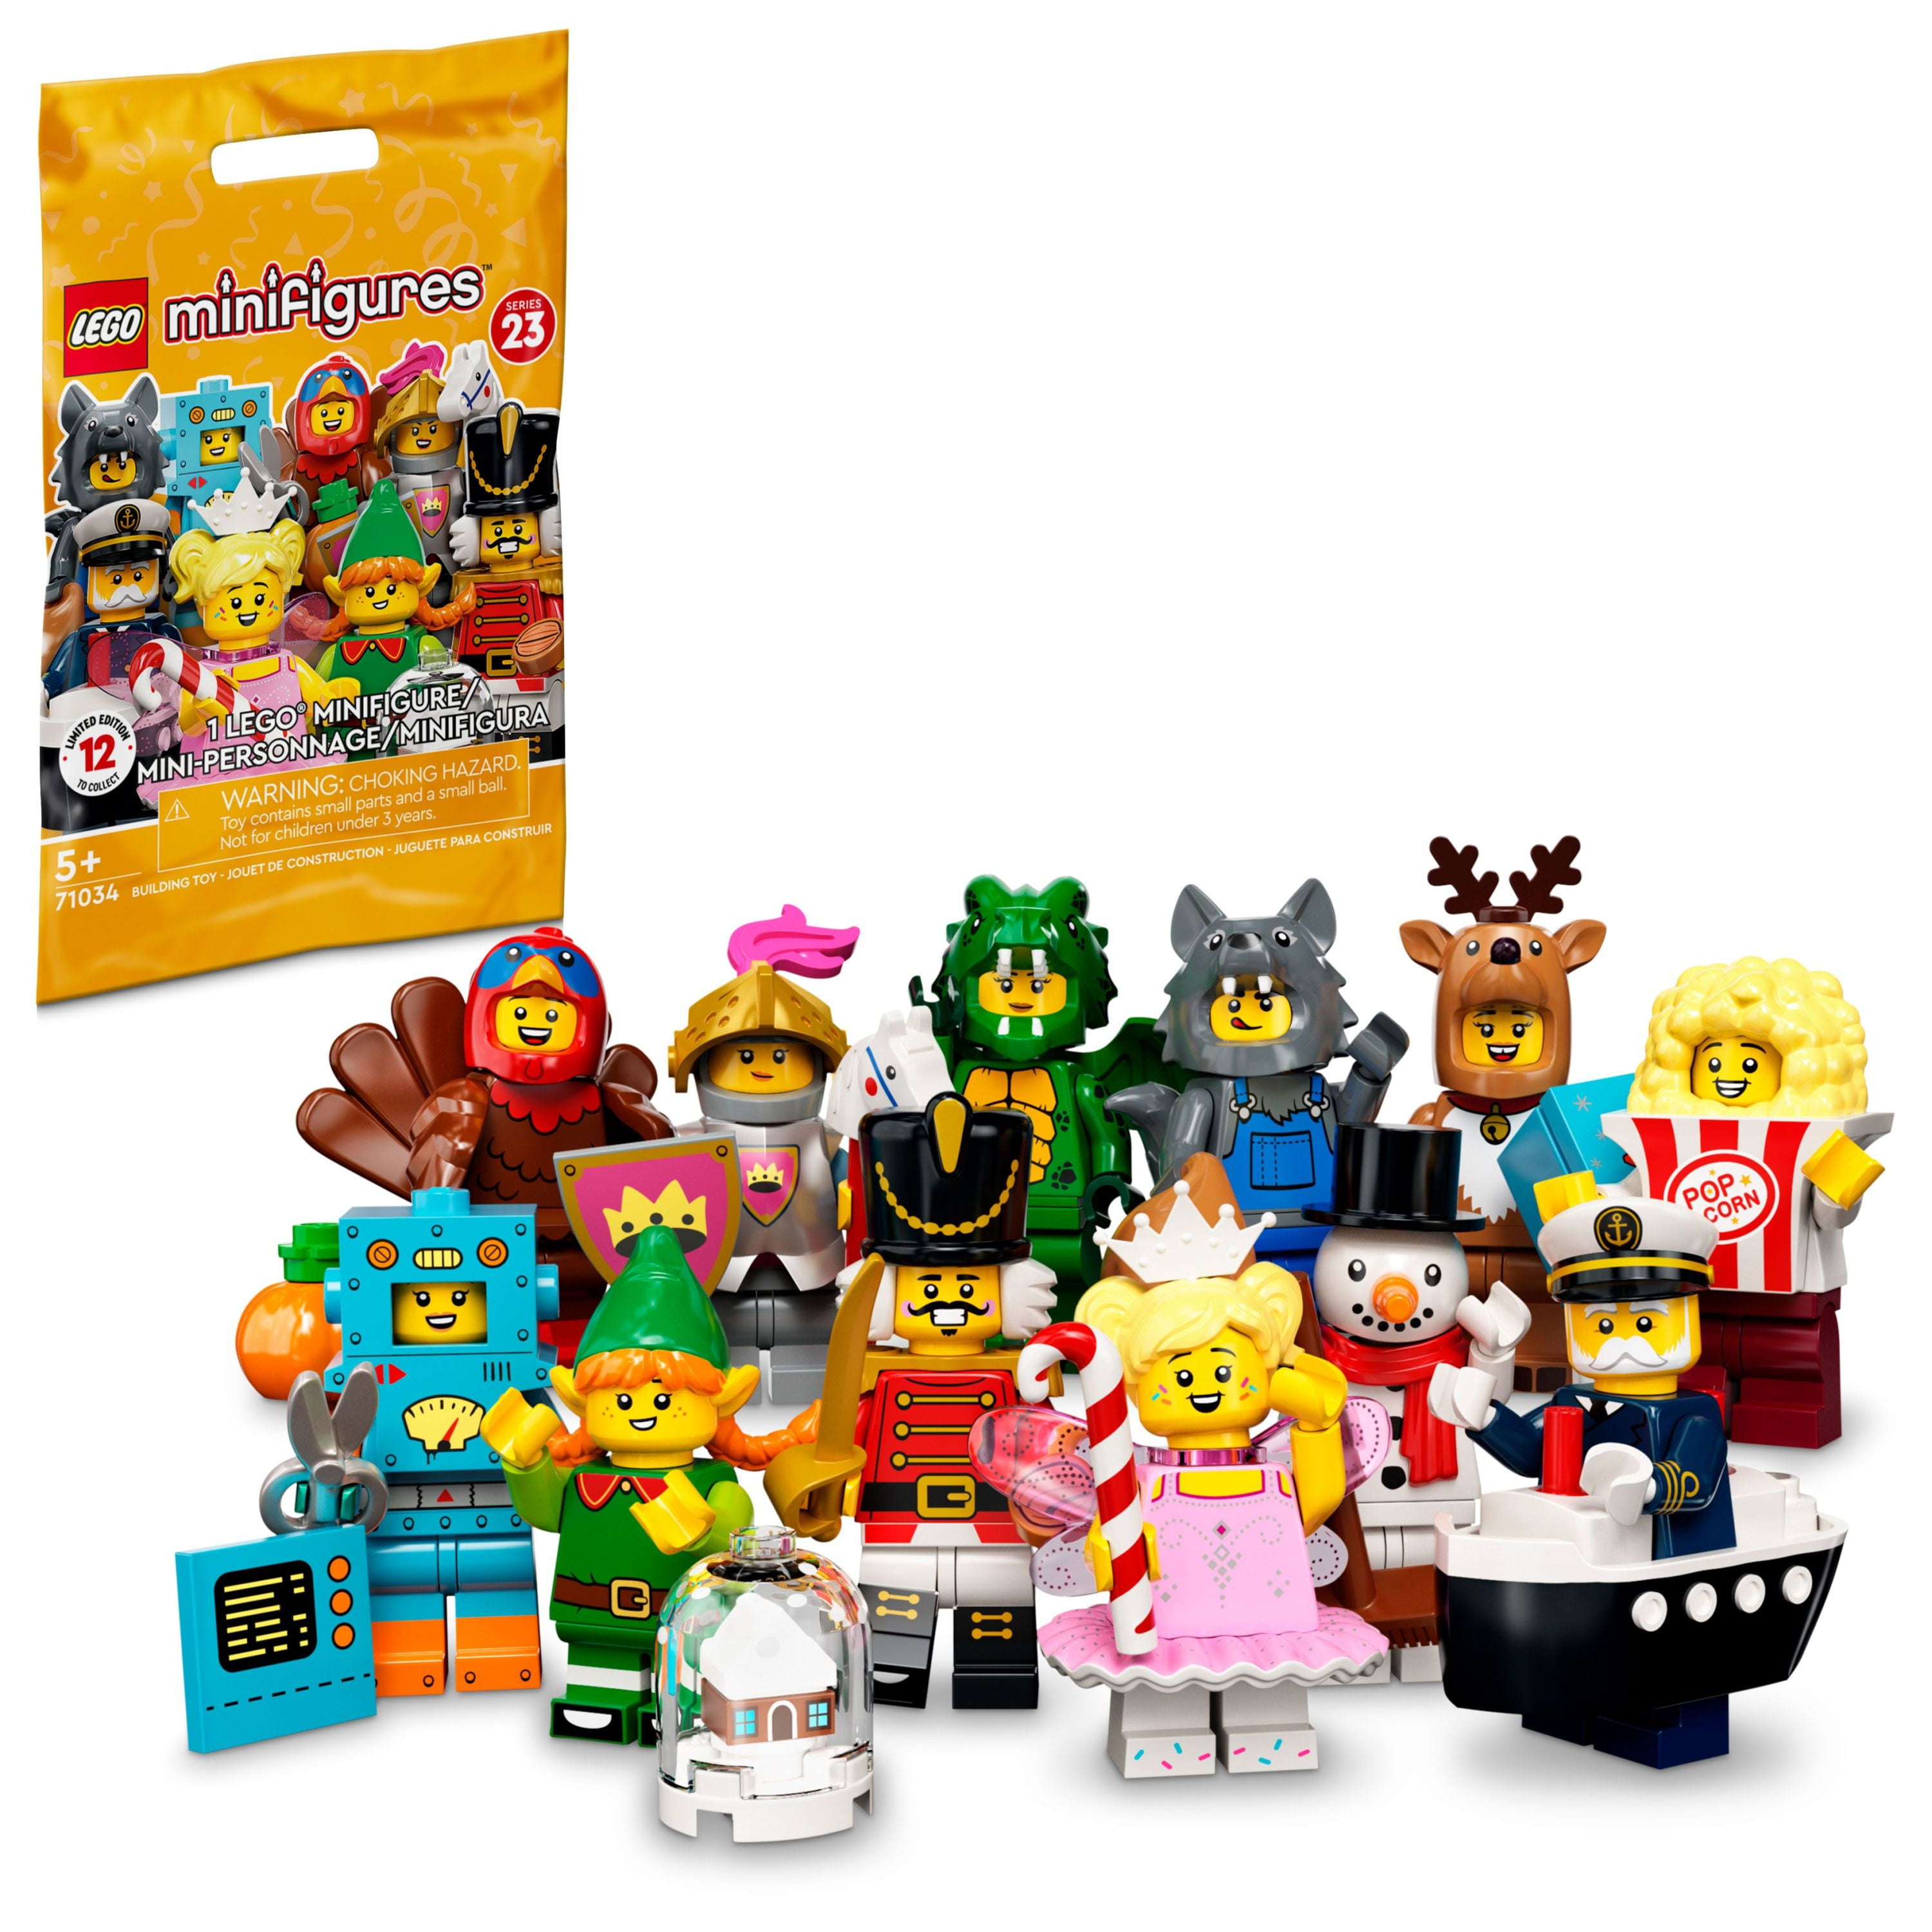 Lil længde Dare LEGO Minifigures Series 23 71034 Limited-Edition Building Toy Set (1 of 12  to collect) (One Random Pack) - Walmart.com